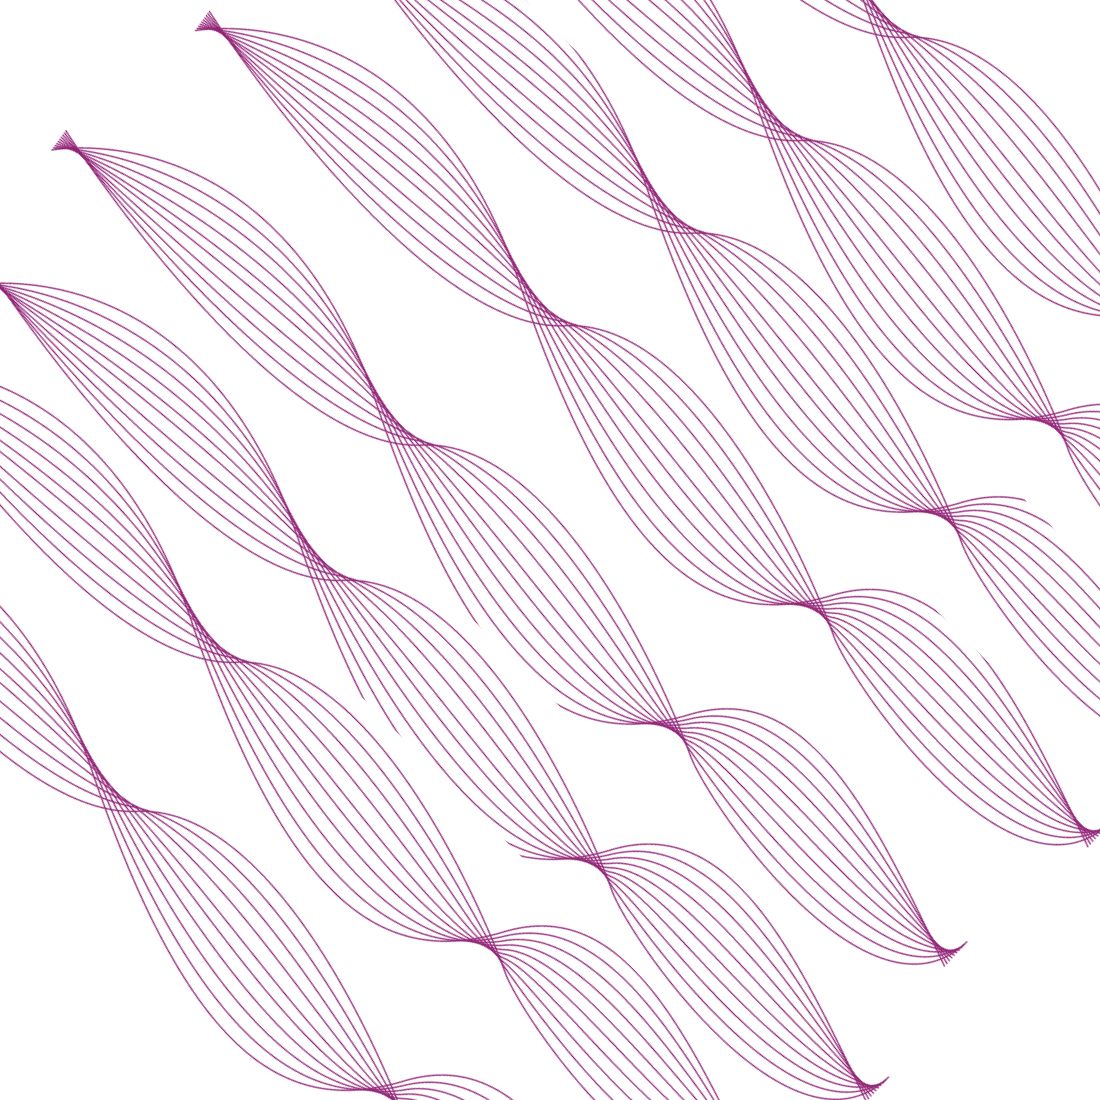 Line of wavy lines on a white background.